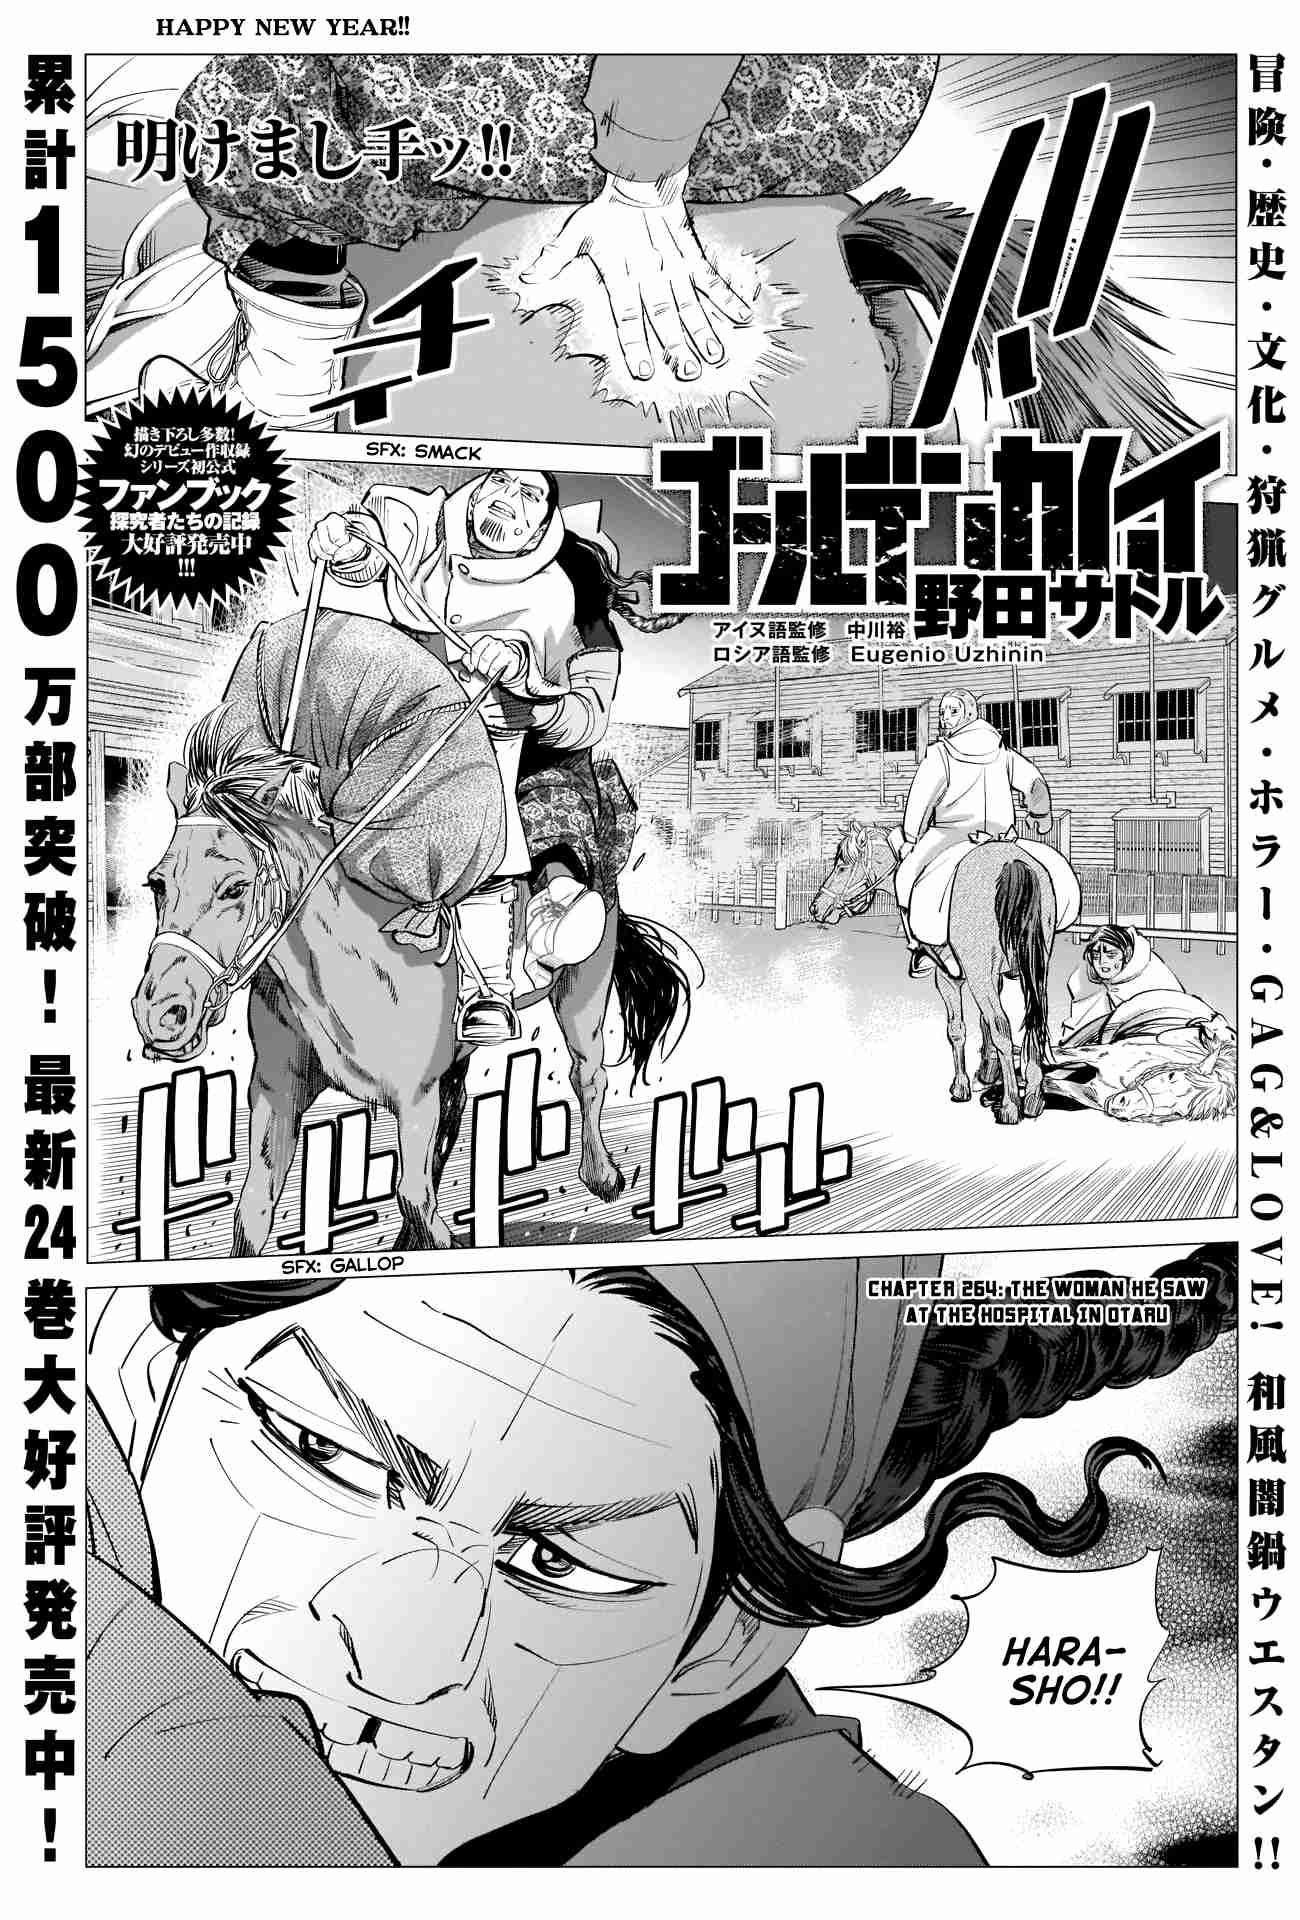 Golden Kamuy Ch. 264 The Woman He Saw at the Hospital in Otaru